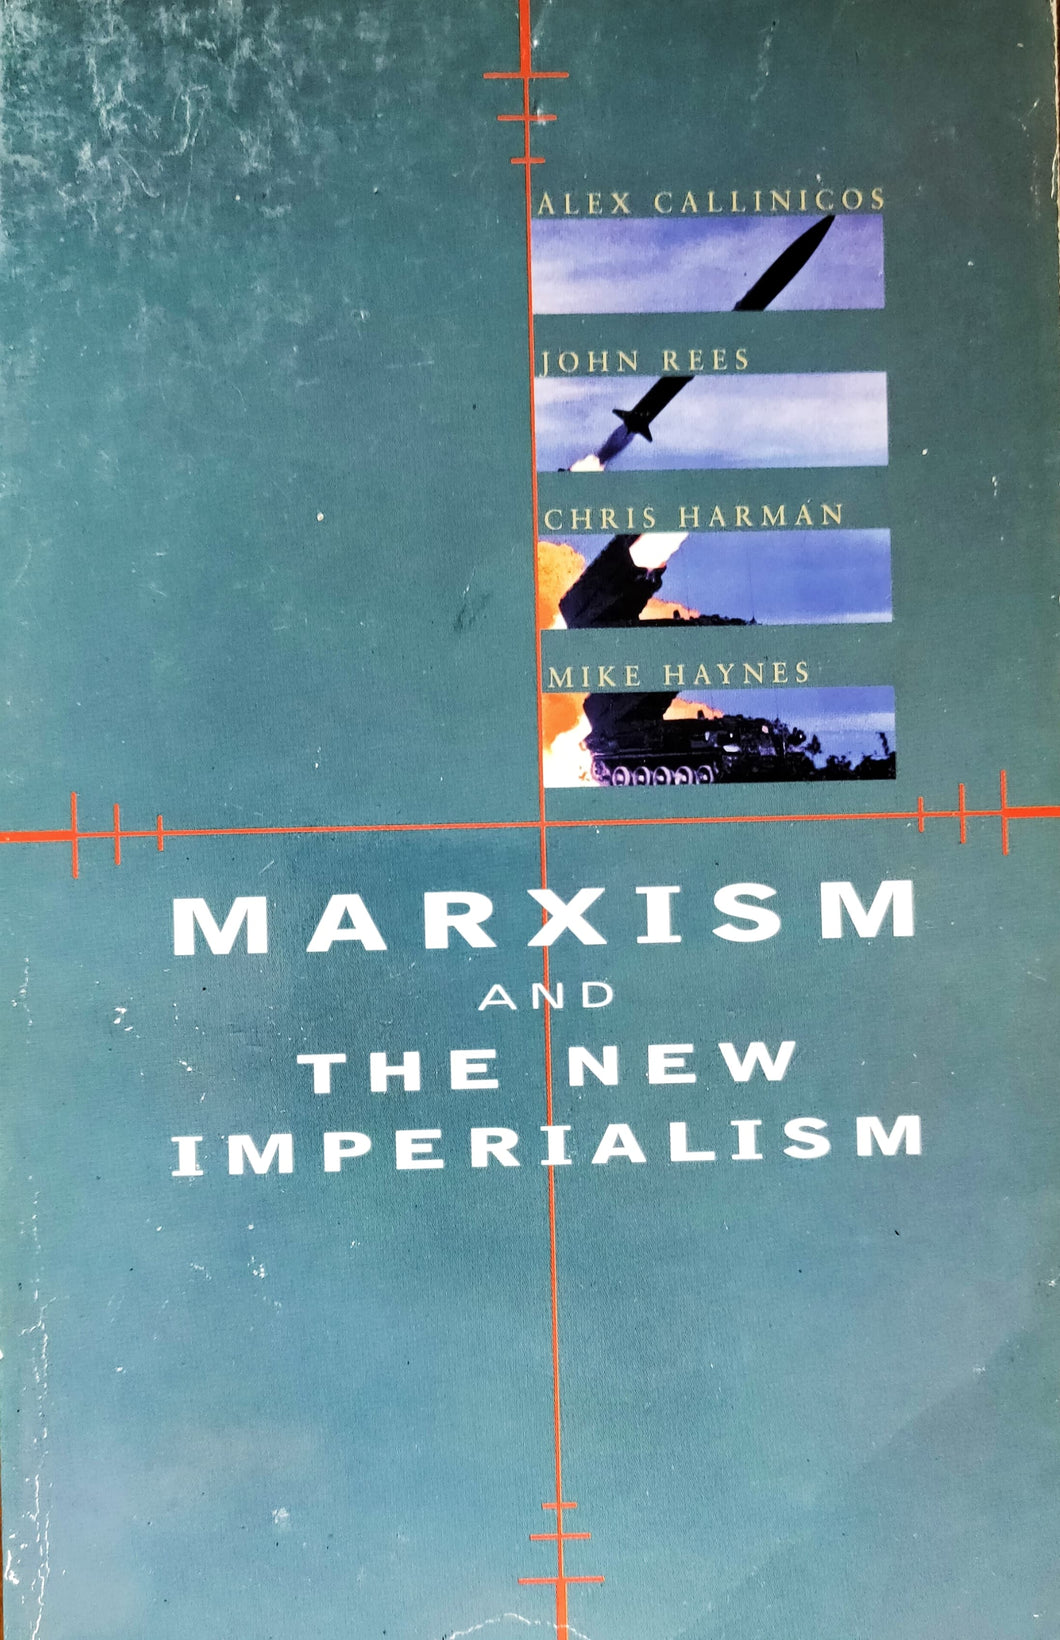 Marxism and the New Imperialism